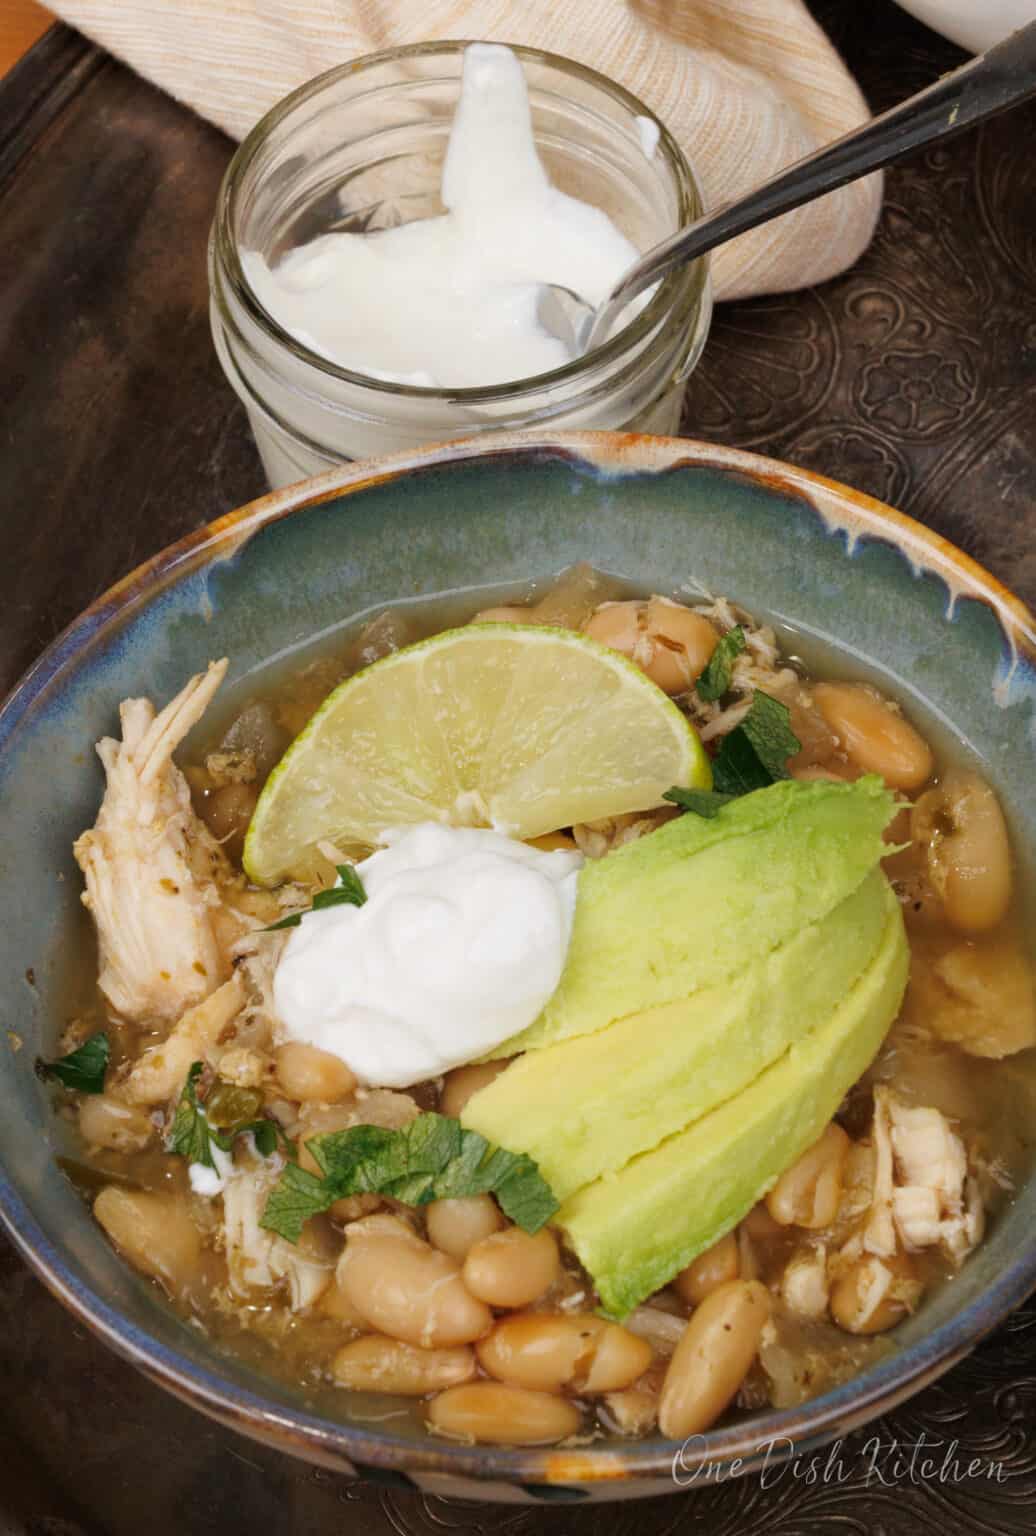 Slow Cooker White Chicken Chili For One Recipe - One Dish Kitchen